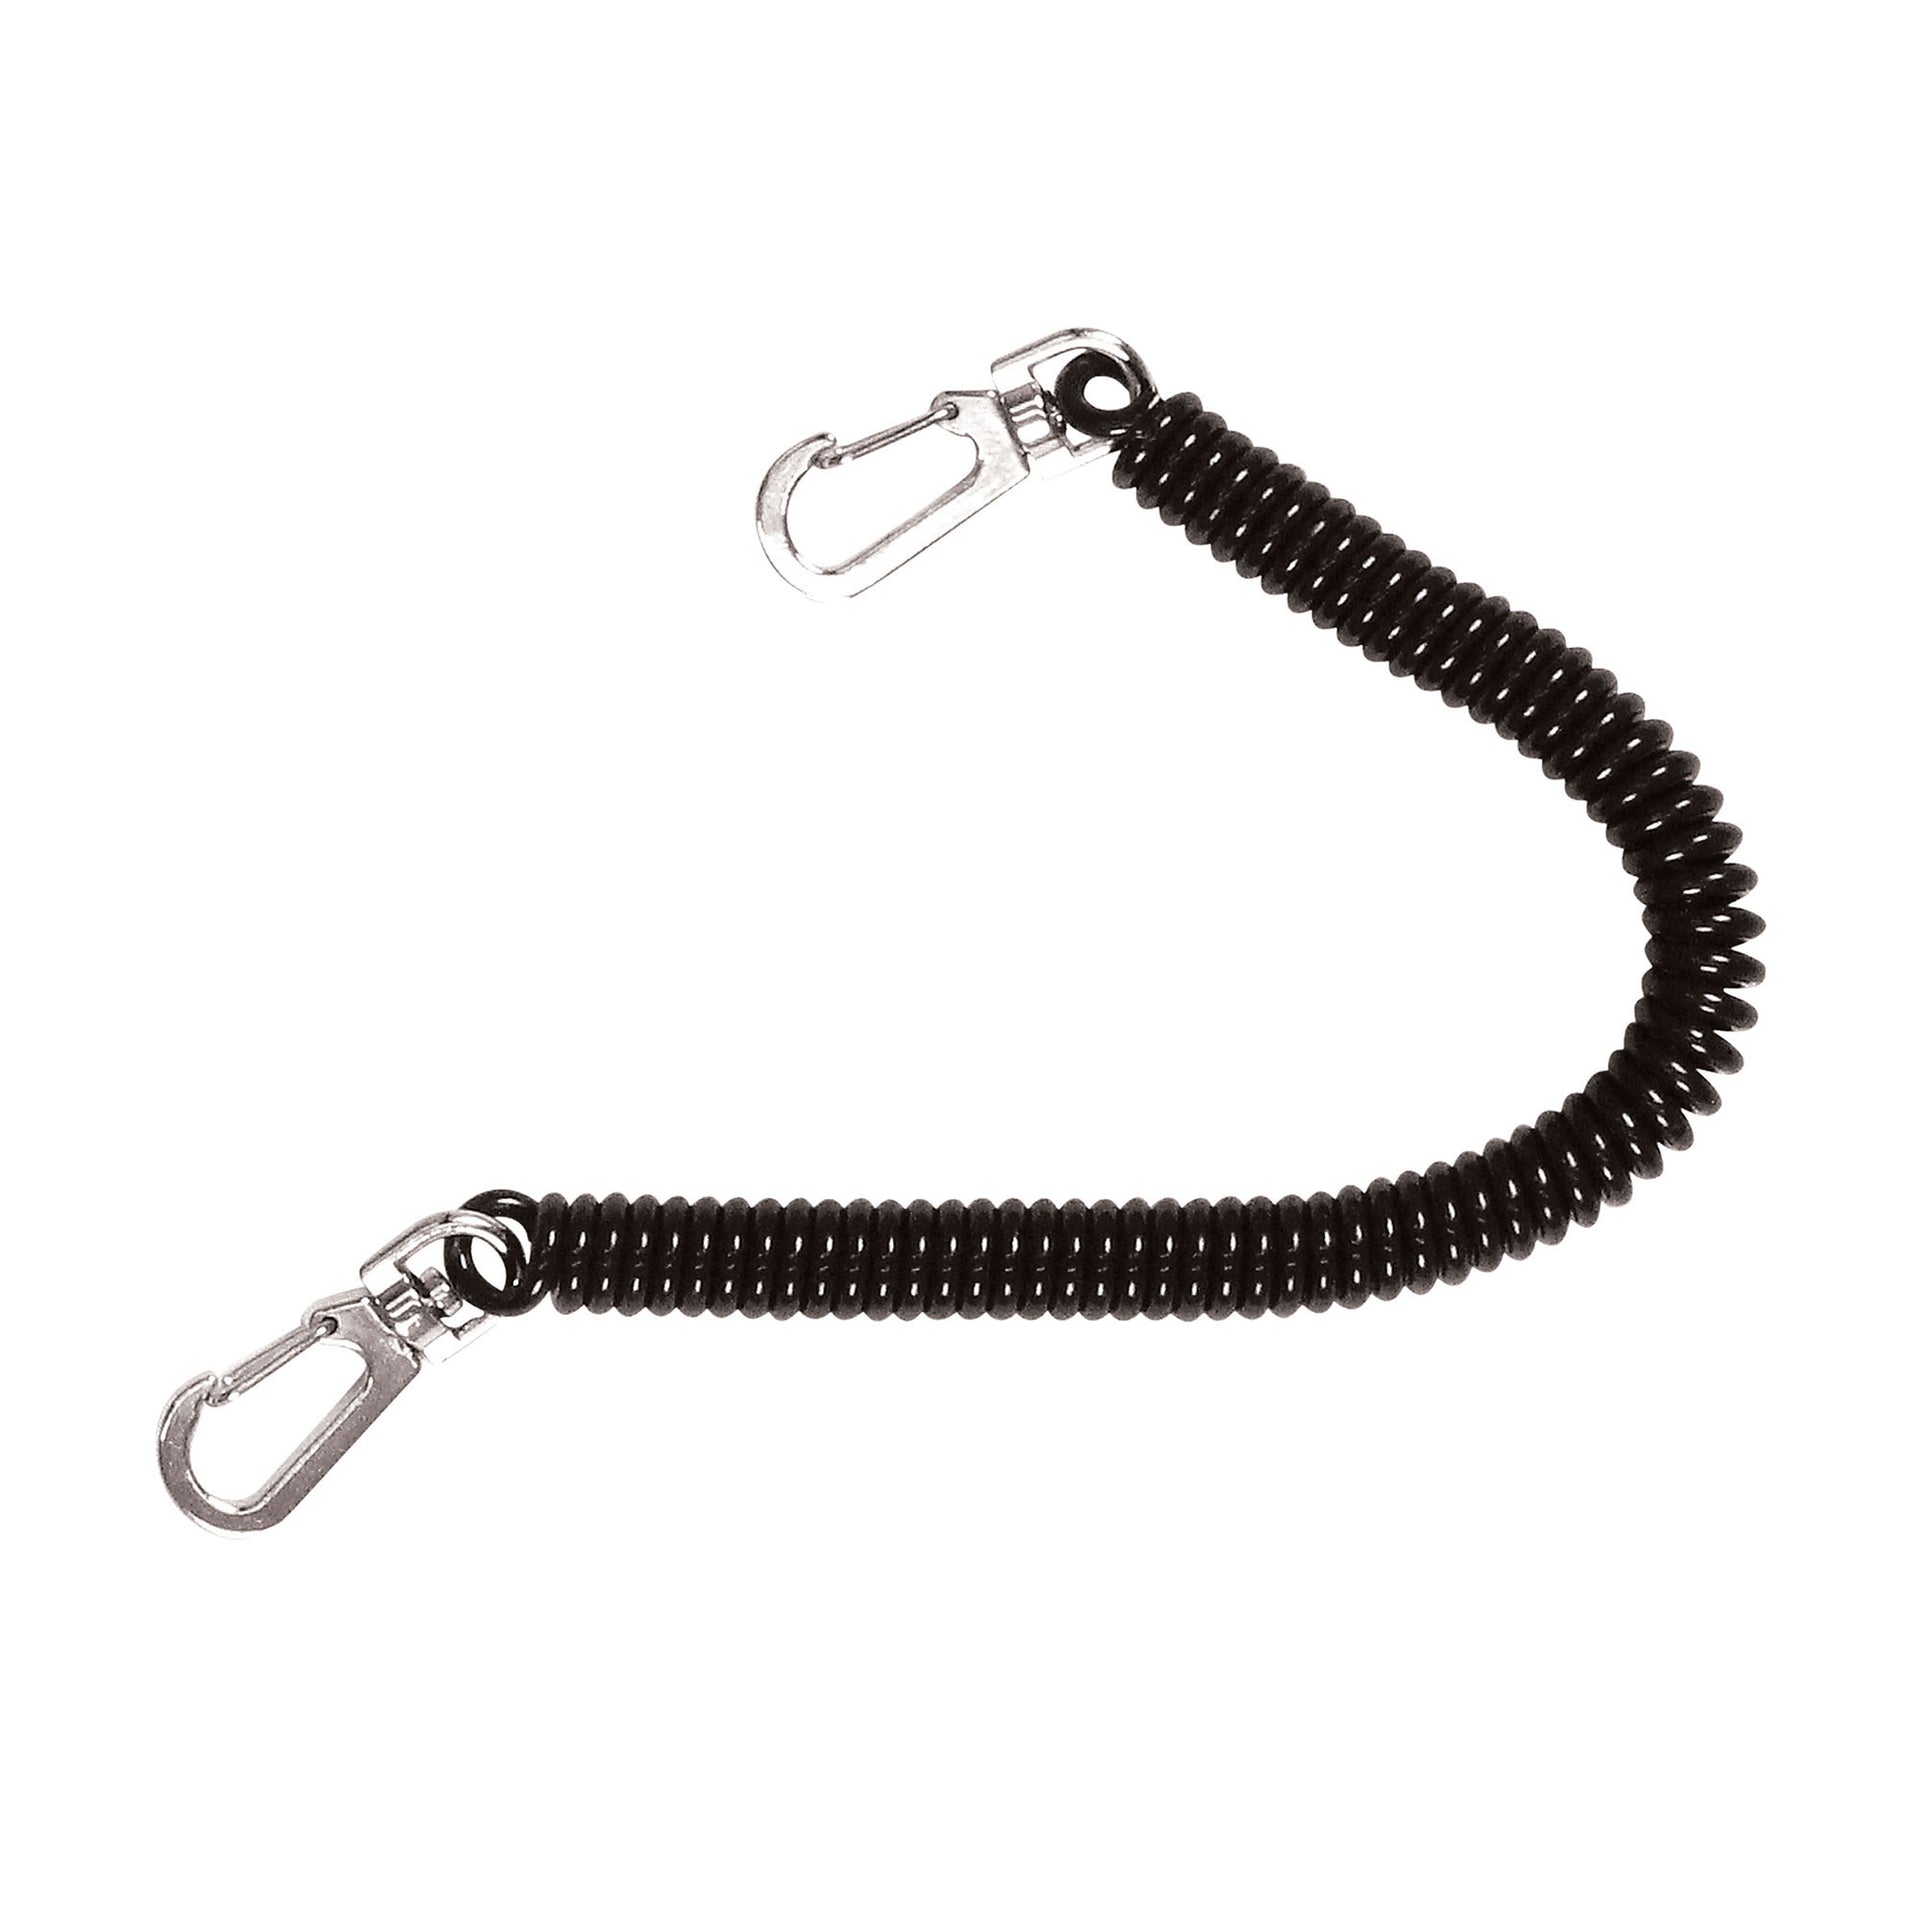 Lix&Rix Coil Stretch Lanyard for Fishing Pliers Utility Knives